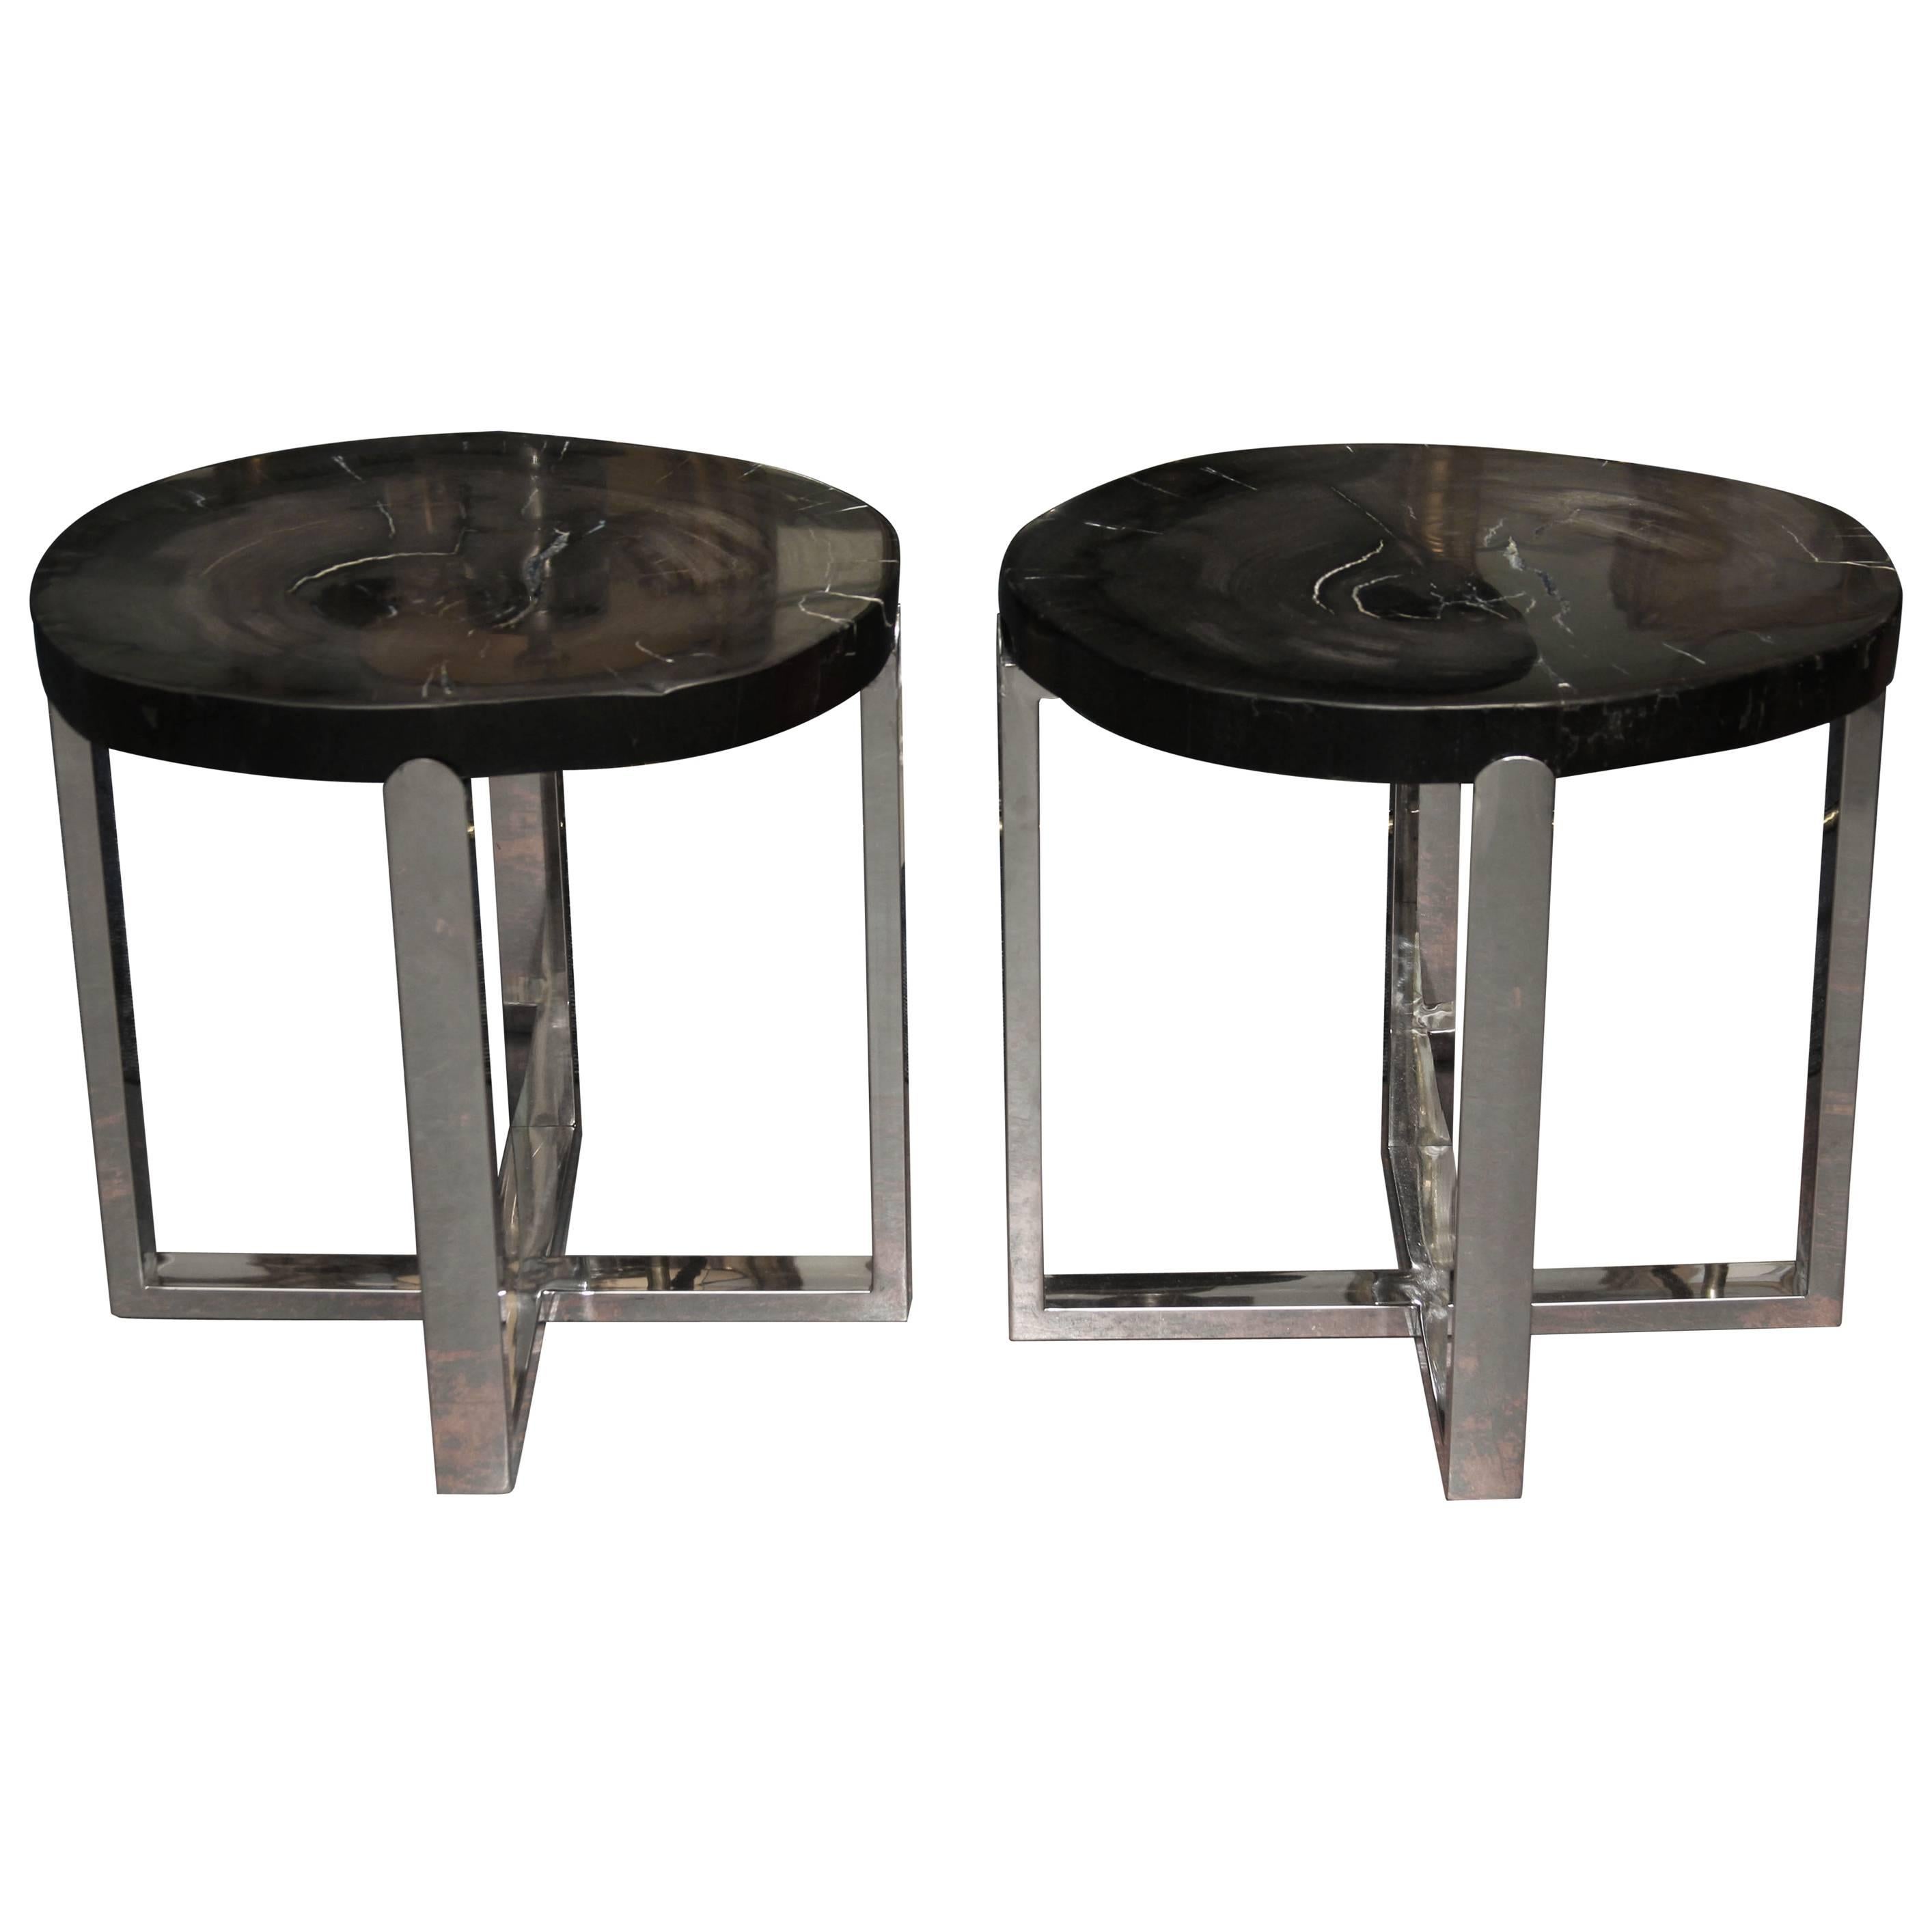 Pair of Black Stone Slab Side End Tables with Chromed Bases